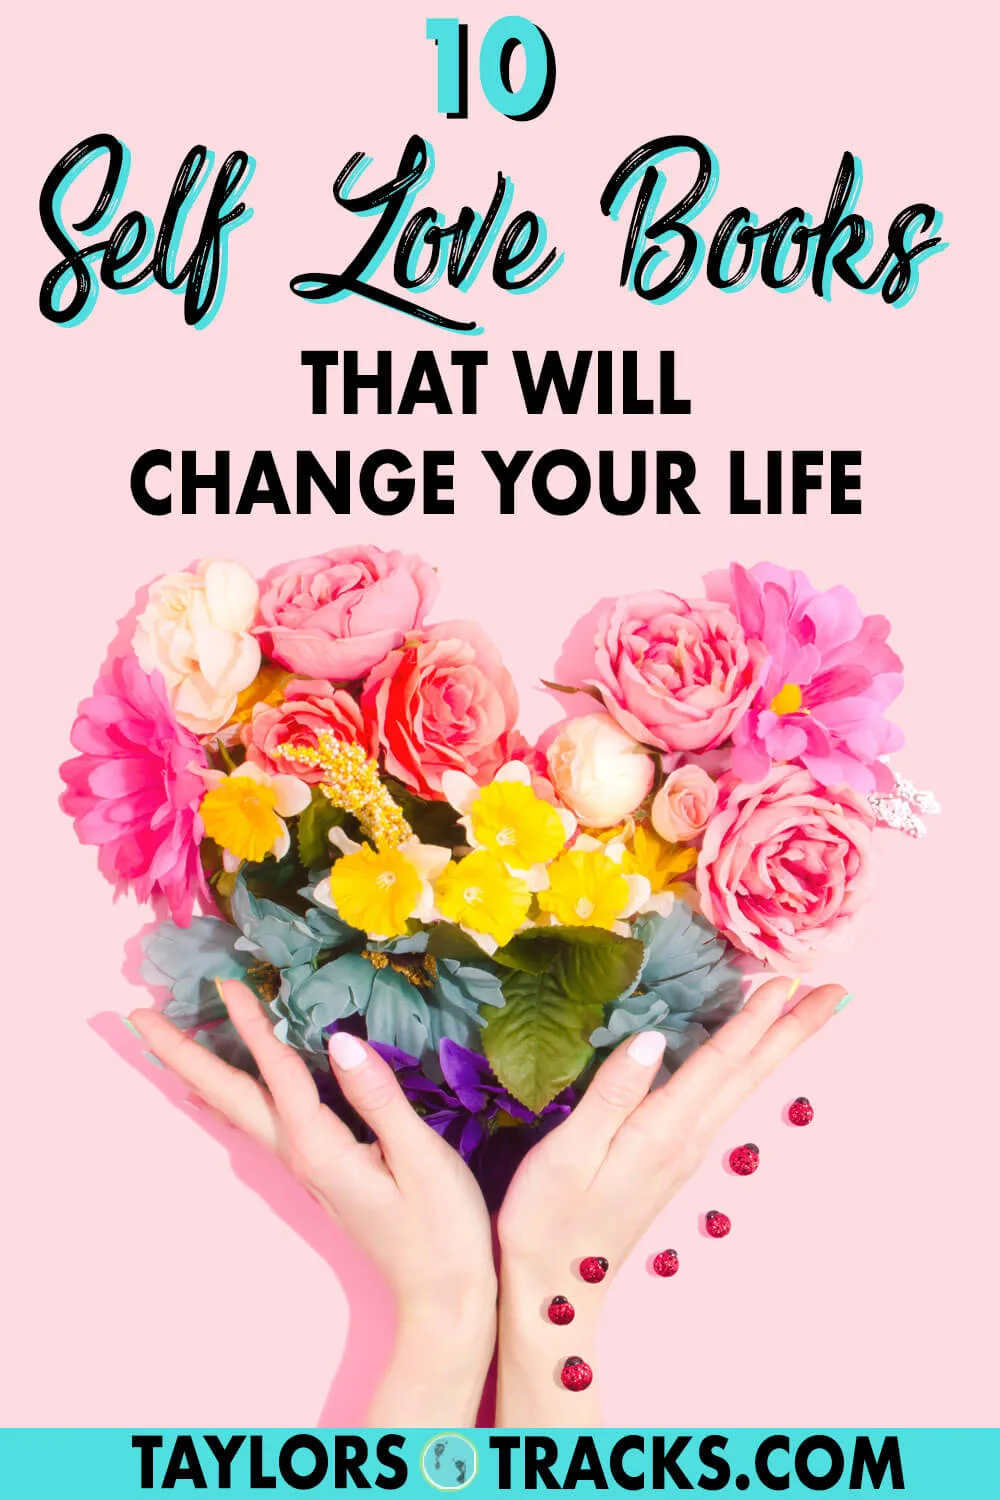 These books about self love will help you have a deeper understanding of what self love entails from self love experts. Learn how to be confident with your next great read. Click to find a new self love book!